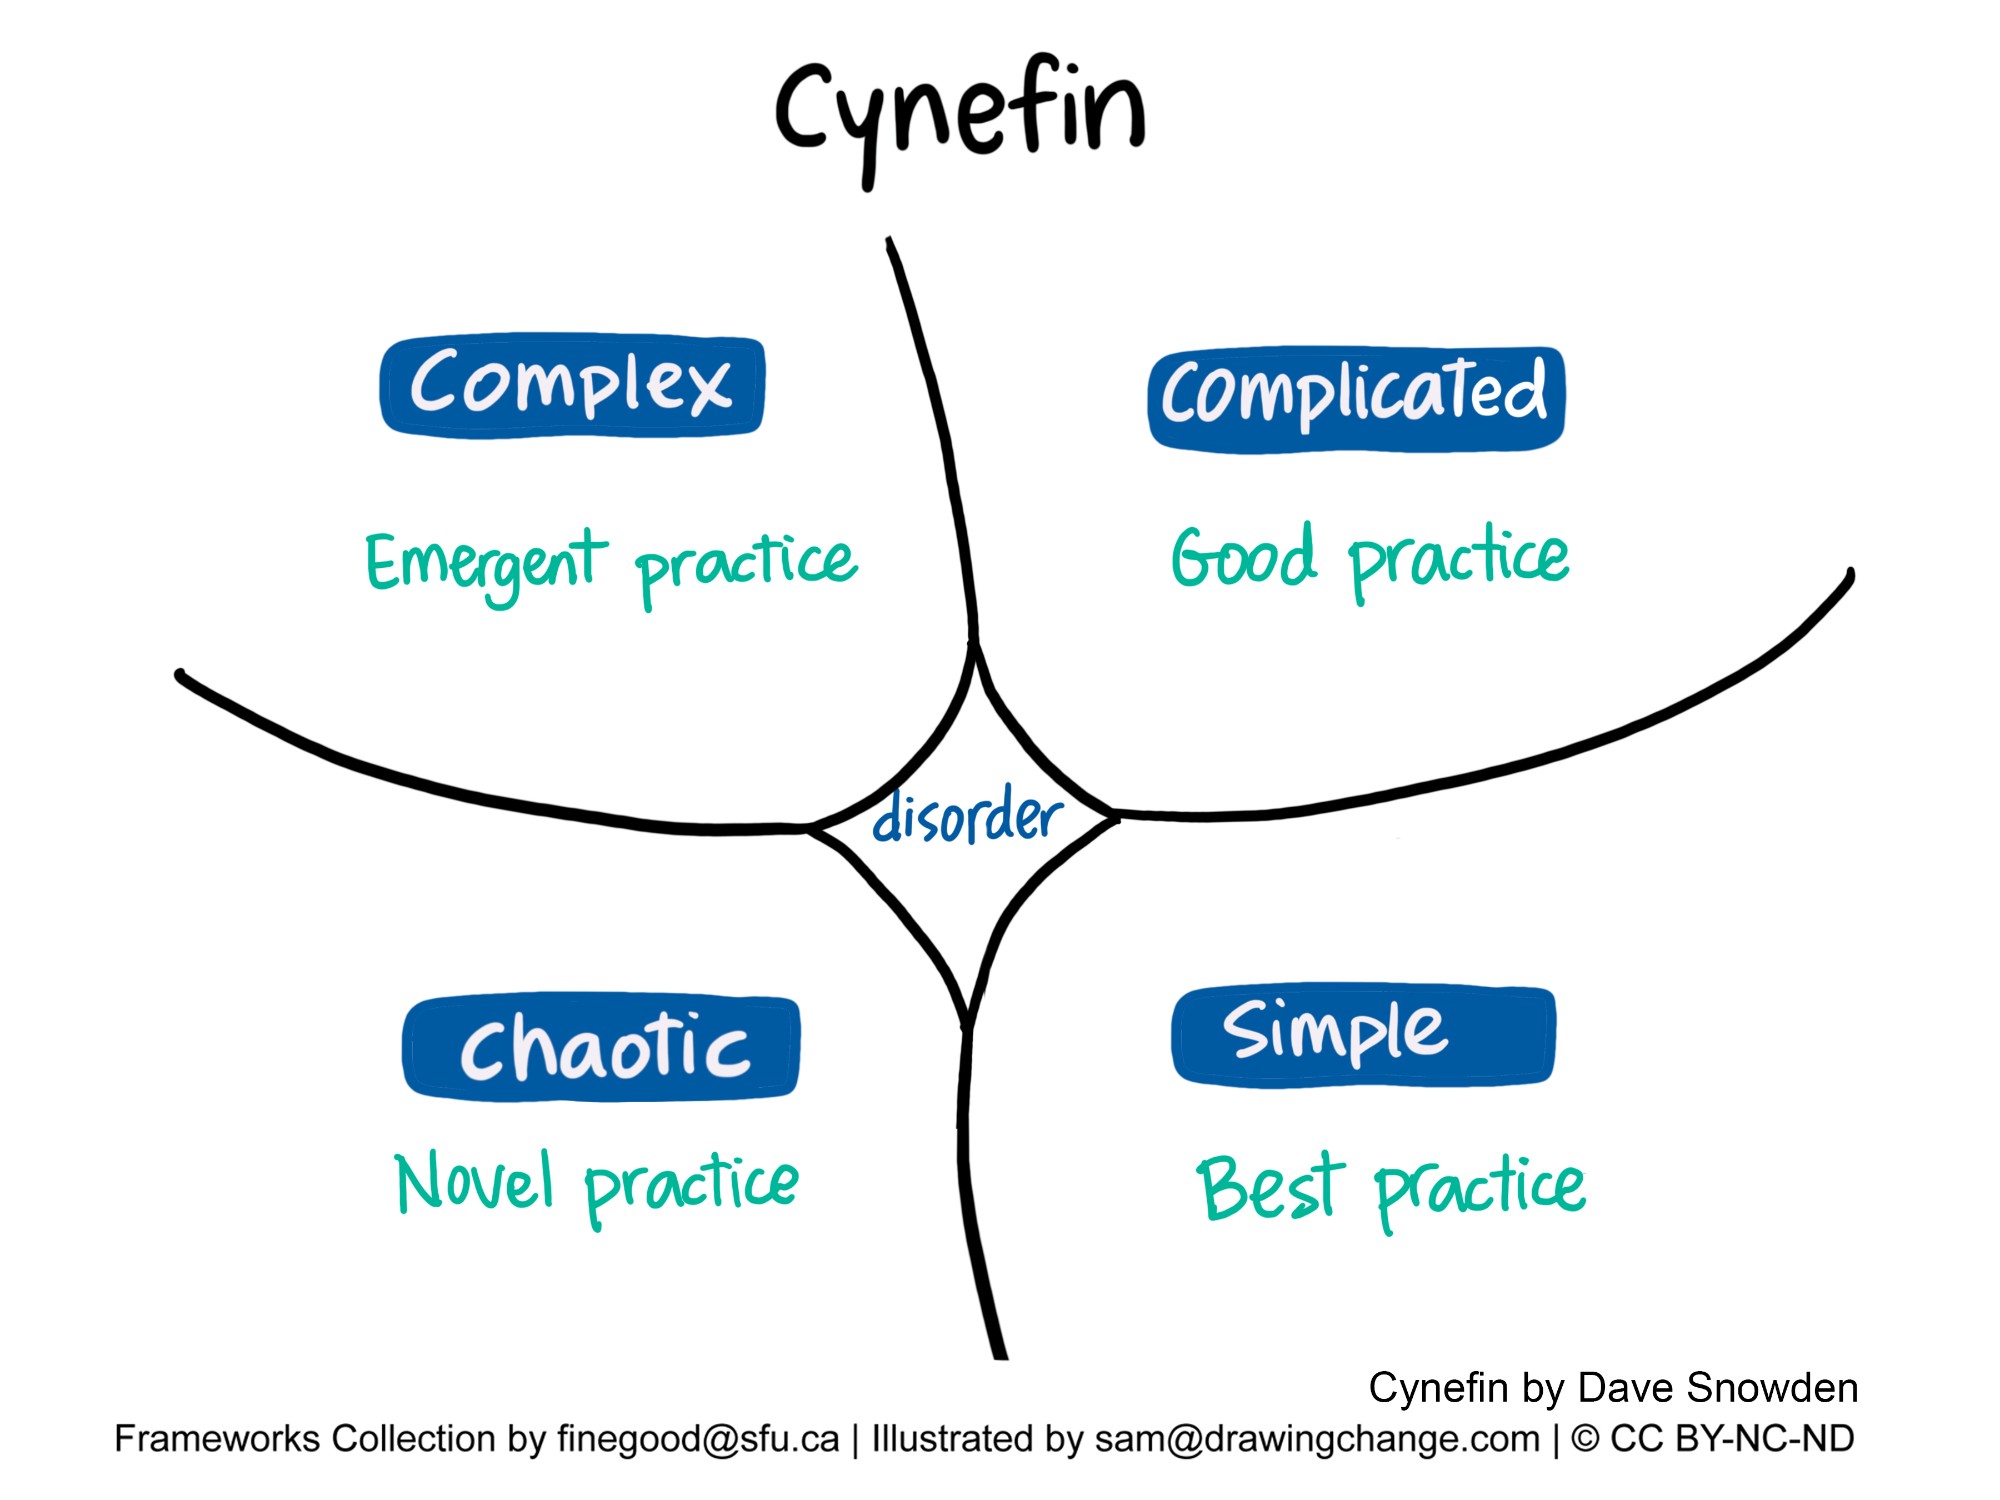 The image is a simple, text-based diagram that illustrates the Cynefin framework's four domains: Complex, Complicated, Chaotic, and Simple. Each domain is labeled with a type of practice that is appropriate for dealing with systems or problems within that domain: "Best practice" for Simple, "Good practice" for Complicated, "Emergent practice" for Complex, and "Novel practice" for Chaotic. Disorder lies at the center, suggesting that it's a state of not knowing which of the four domains applies.   The framework was created by Dave Snowden, and the image credits Frameworks Collection by finegood@sfu.ca and illustration by sam@drawingchange.com, with a Creative Commons license CC BY-NC-ND.